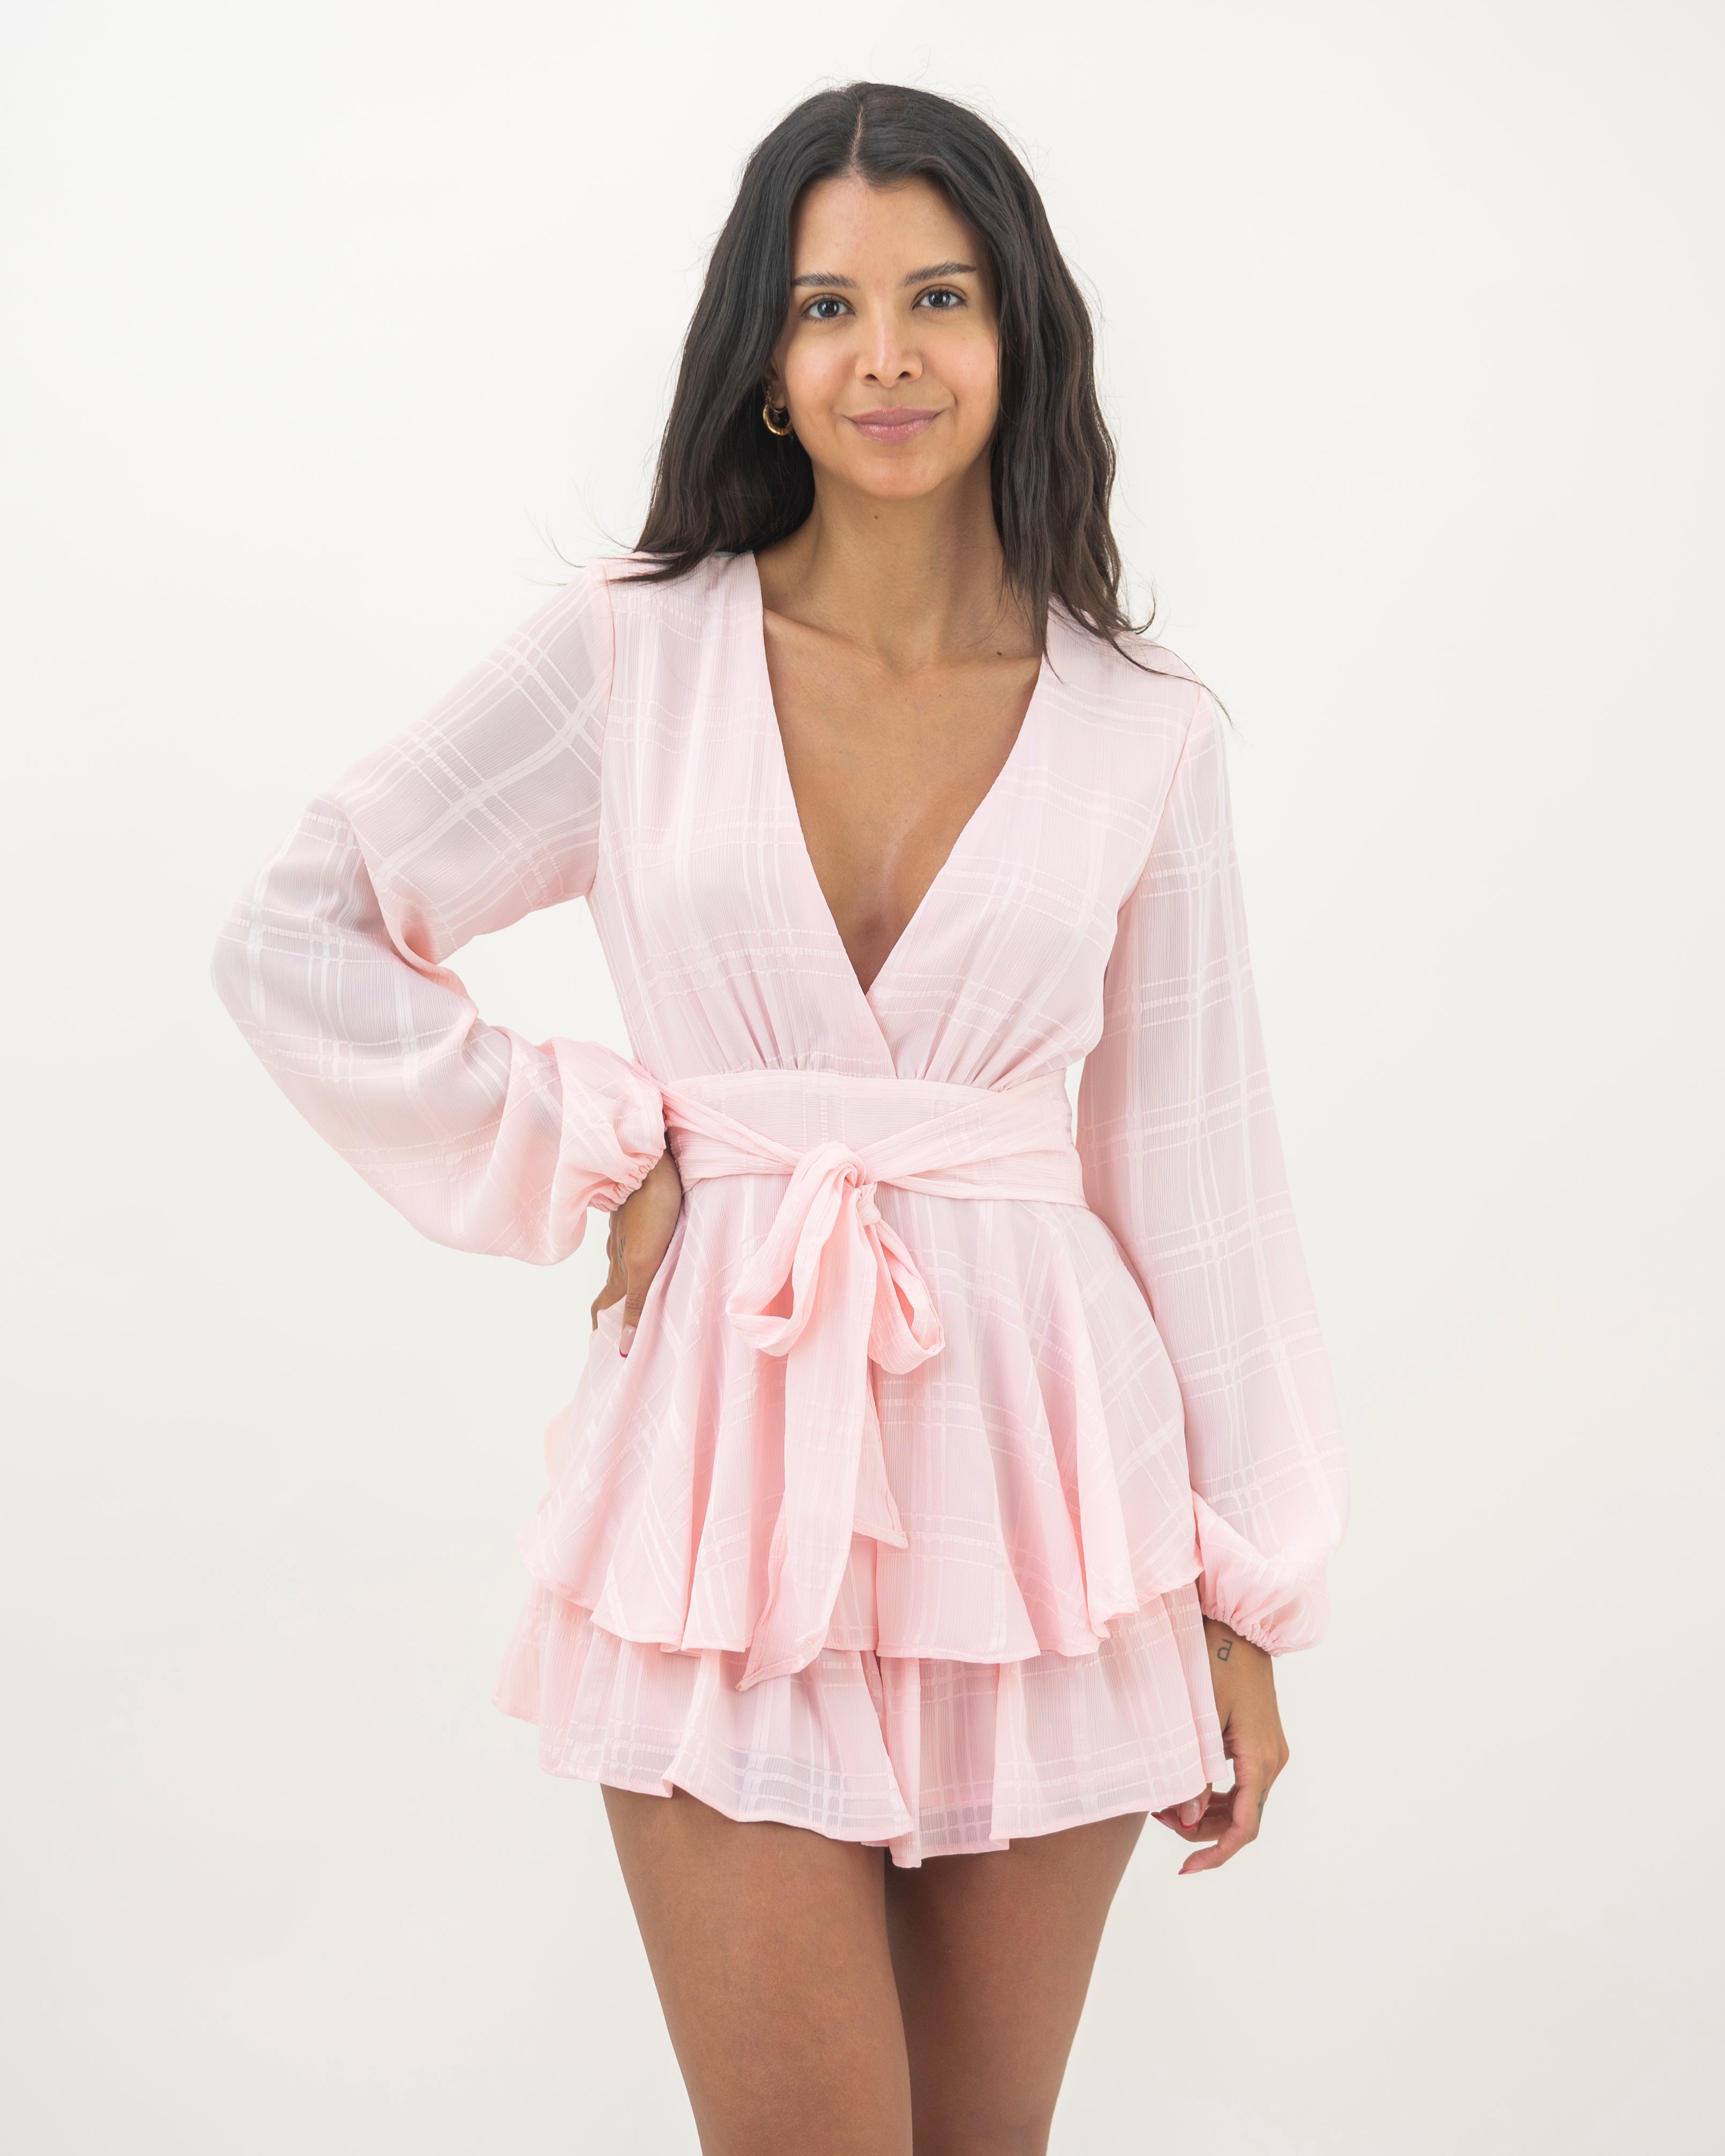 Fashion Light Pink Checkered Ruffle Tie-Up Romper with Bell Sleeve